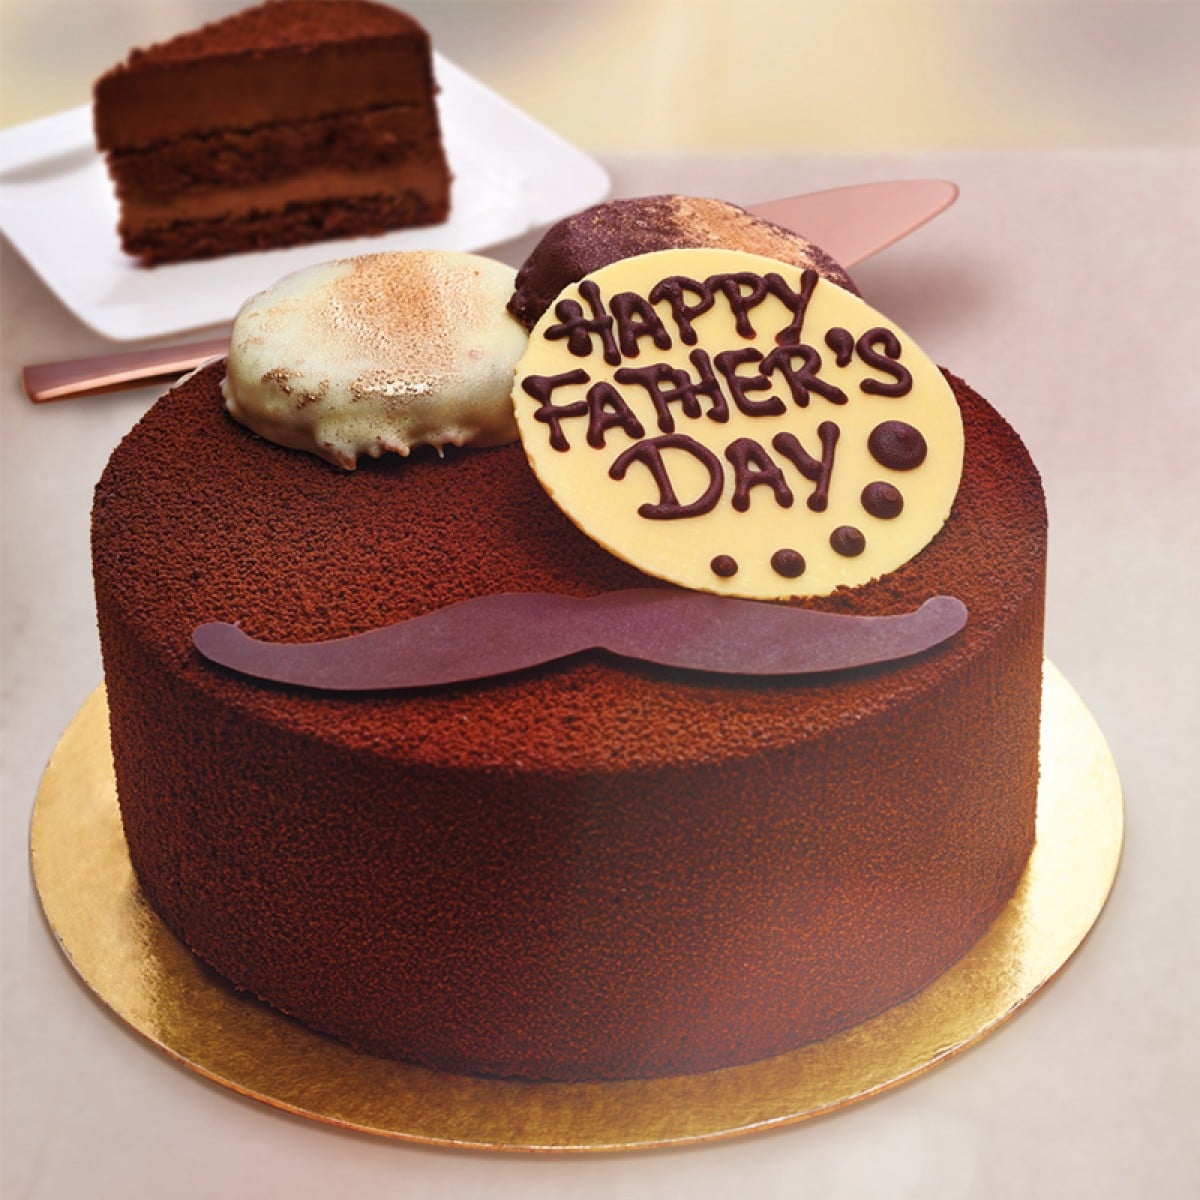  Happy Fathers Day Cake Image